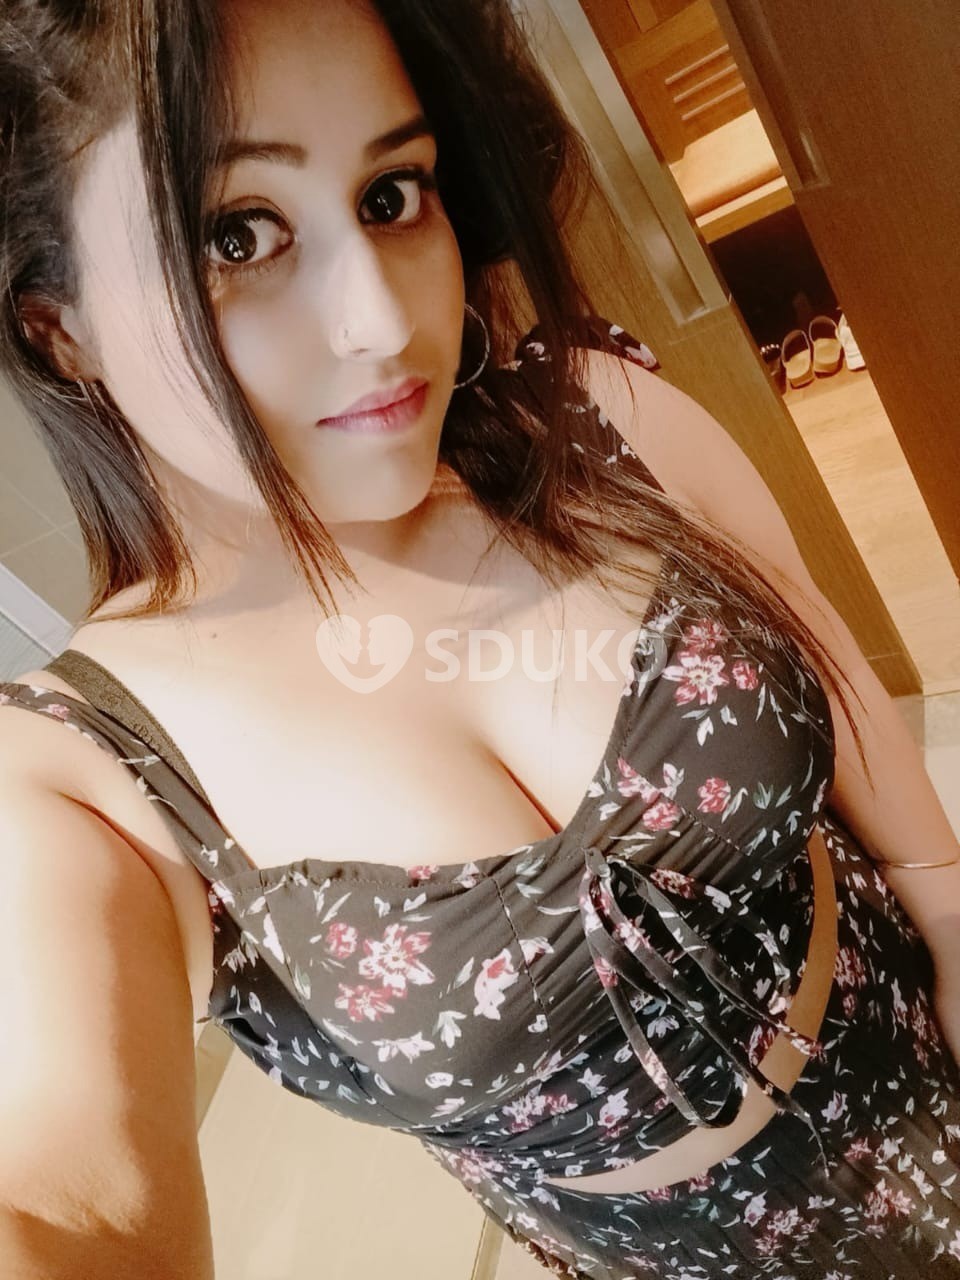 📞89350 SIMMI 02723🌈 AMRITSAR NO ADVANCE ONLY CASH PAYMENT🌈 BEST FEMALE FULL NIGHT ENJOY WITH HOT SEXY